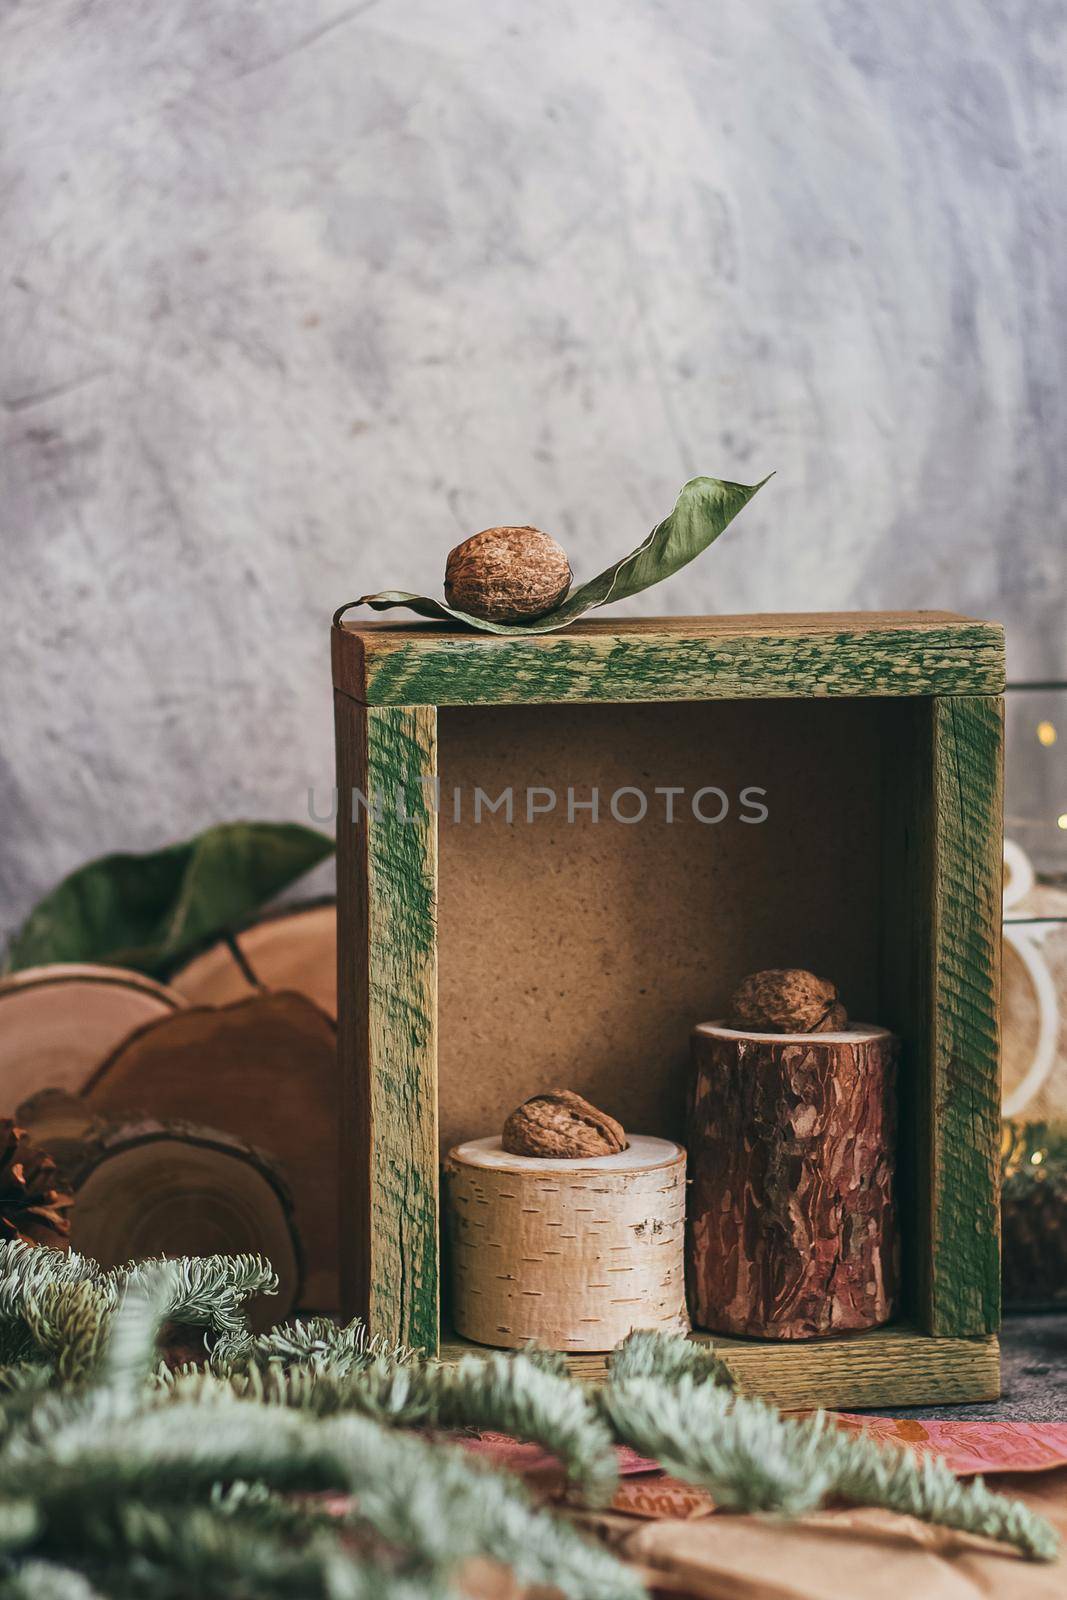 Christmas composition with nuts, rustic wooden box and fir tree branch. Decorated by festive decor. Rustic style.